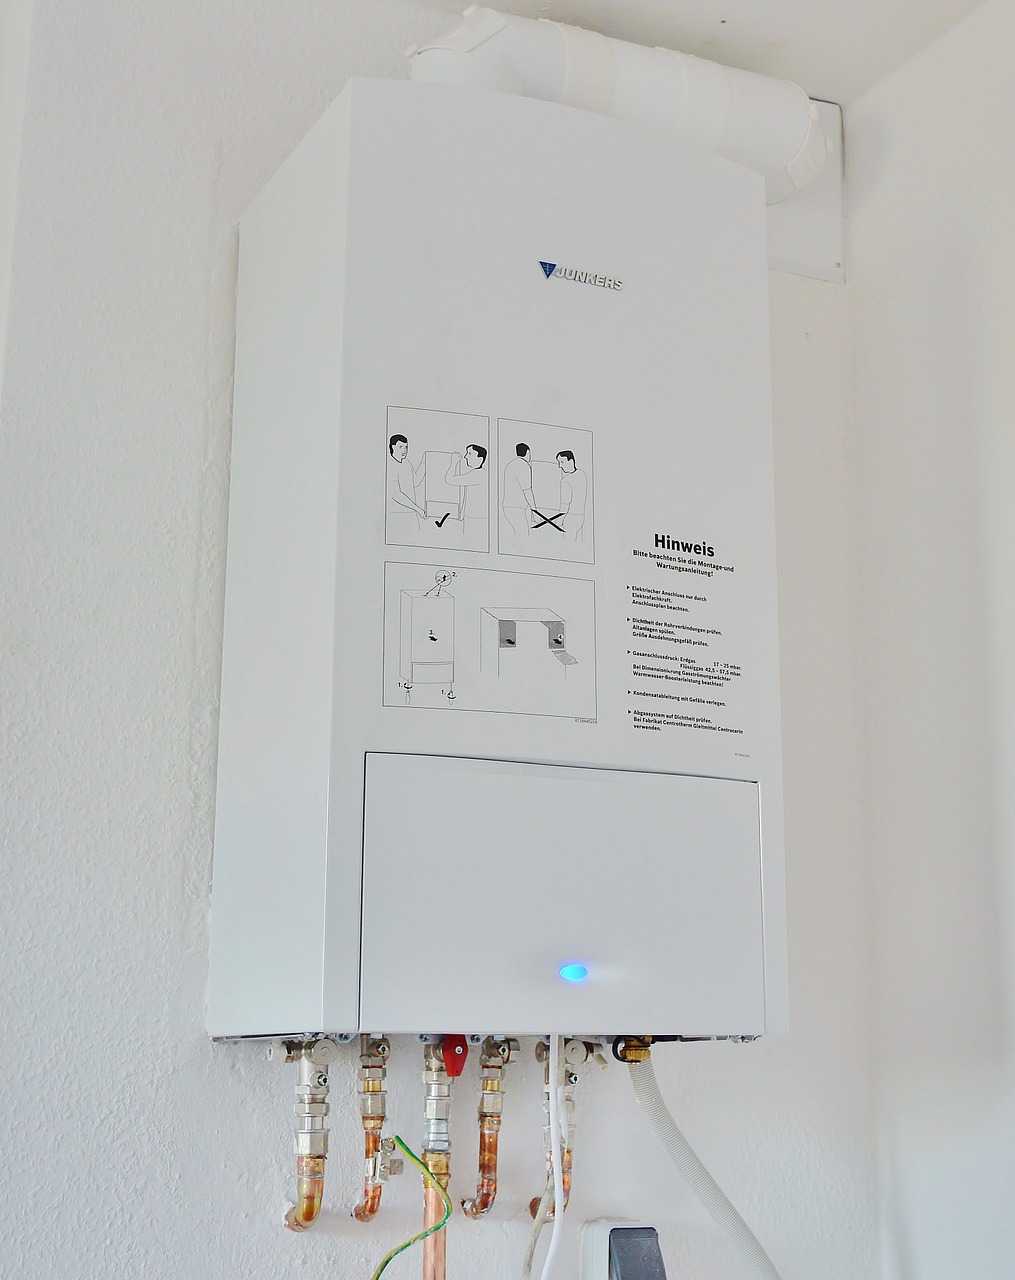 Marey Eco110 Tankless Water Heater Wiring Diagram from www.topbuyingguide.com